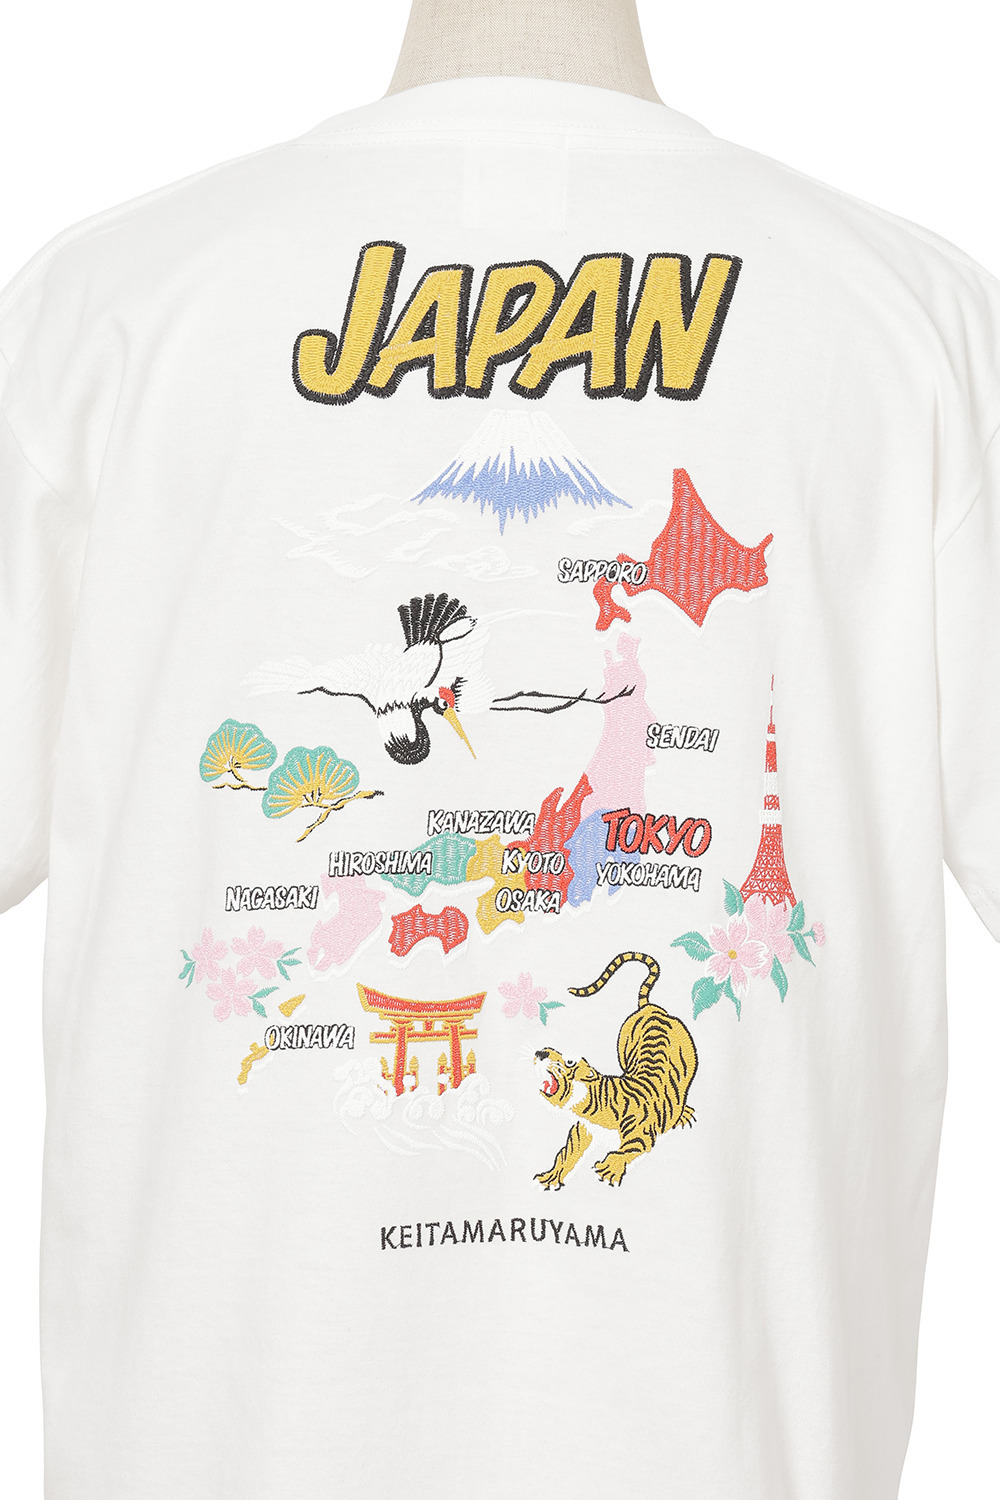 JAPAN Embroidery Style Print Tシャツ 詳細画像 ホワイト 4